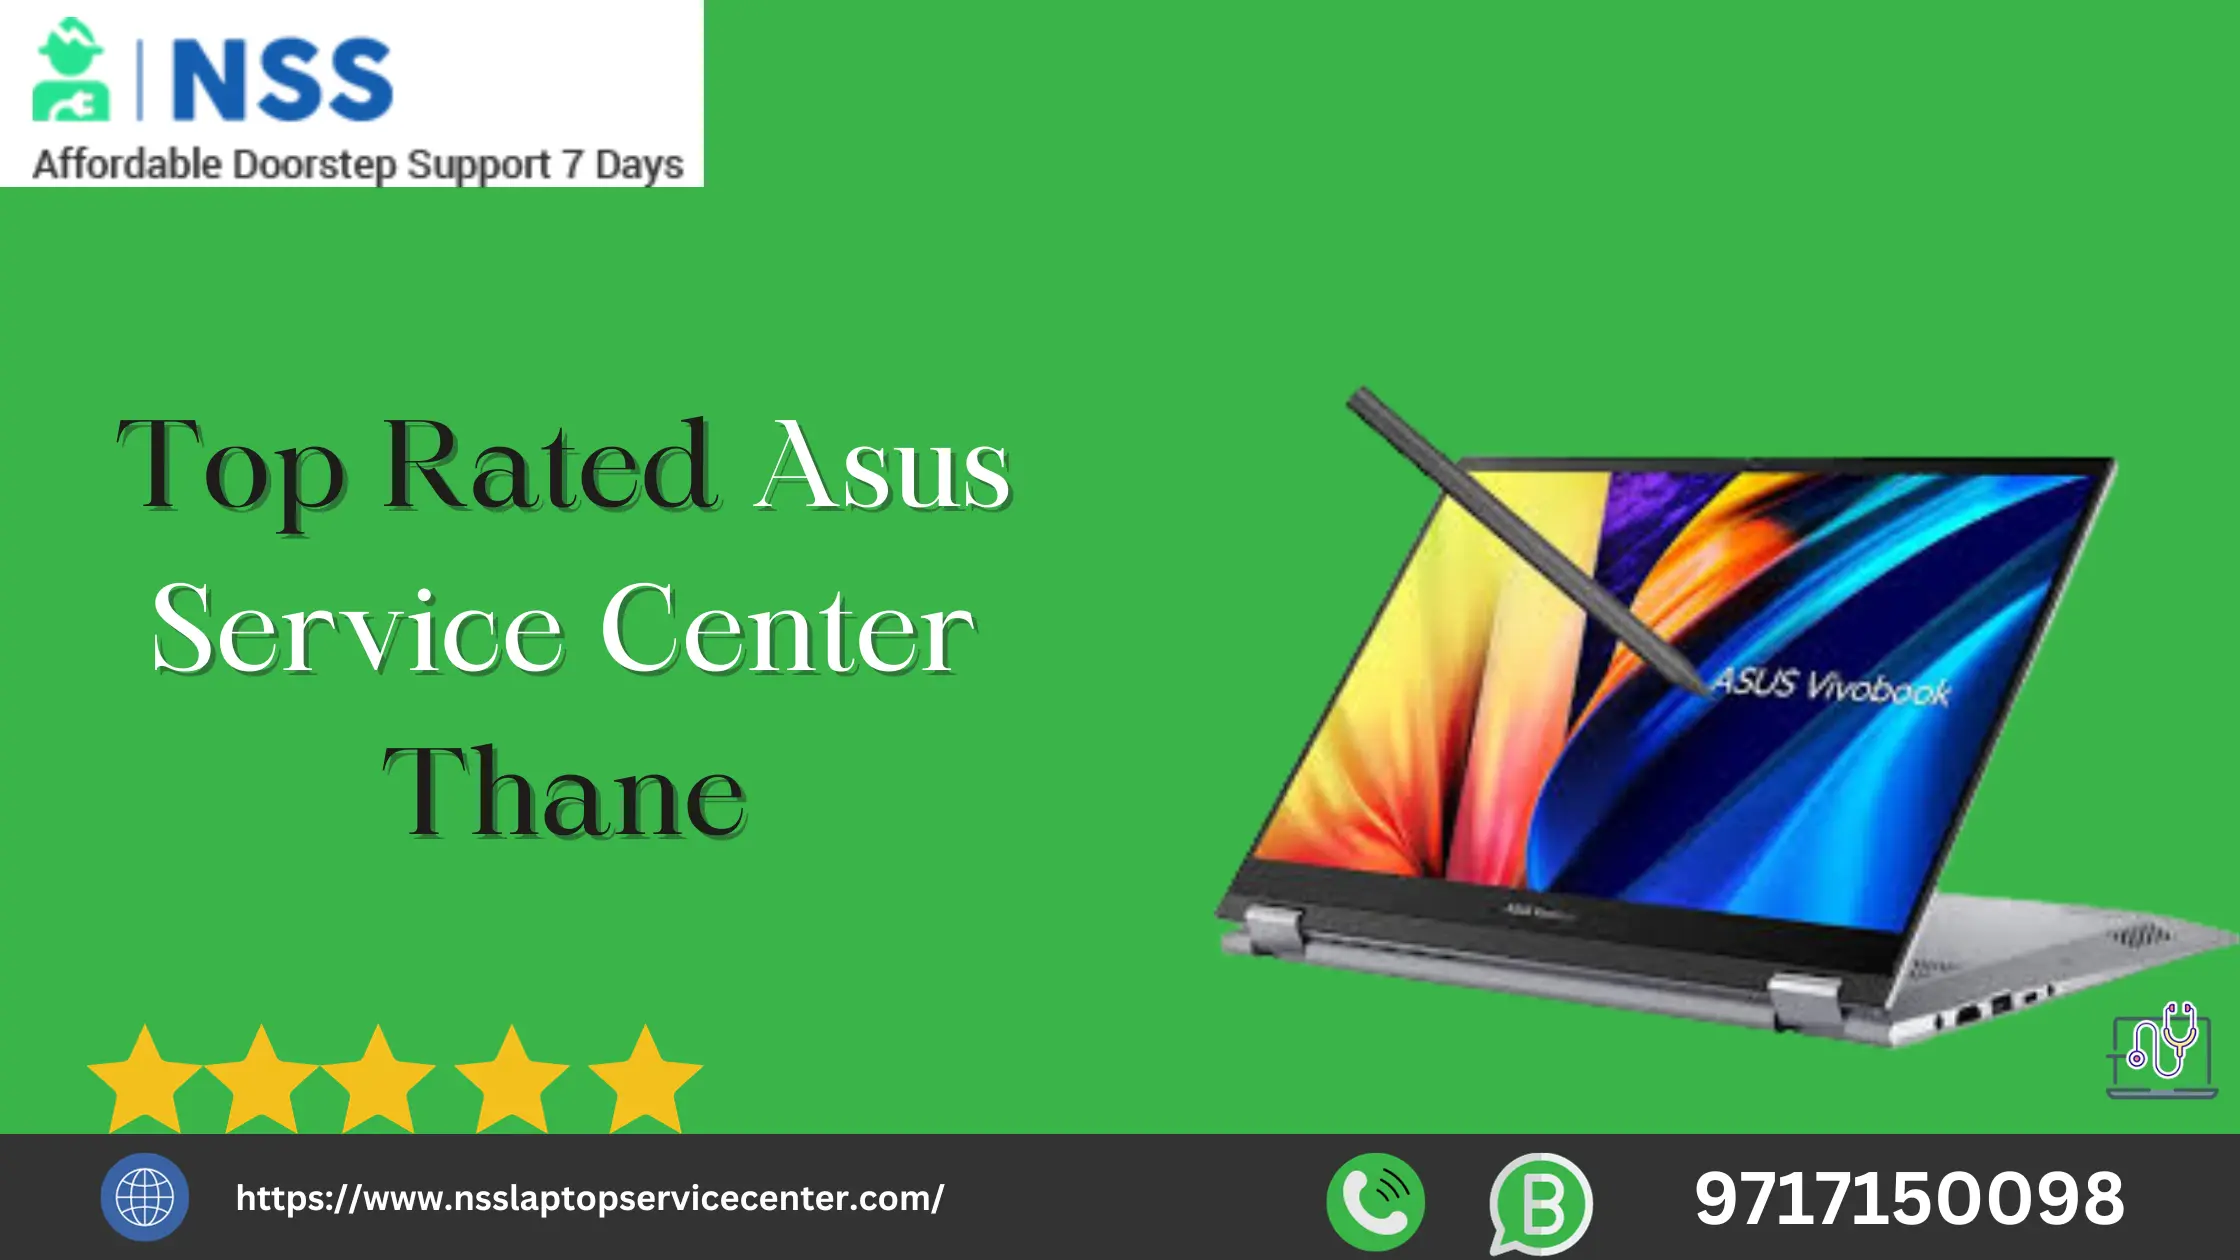 Top Rated Asus Service Center Thane Near Me